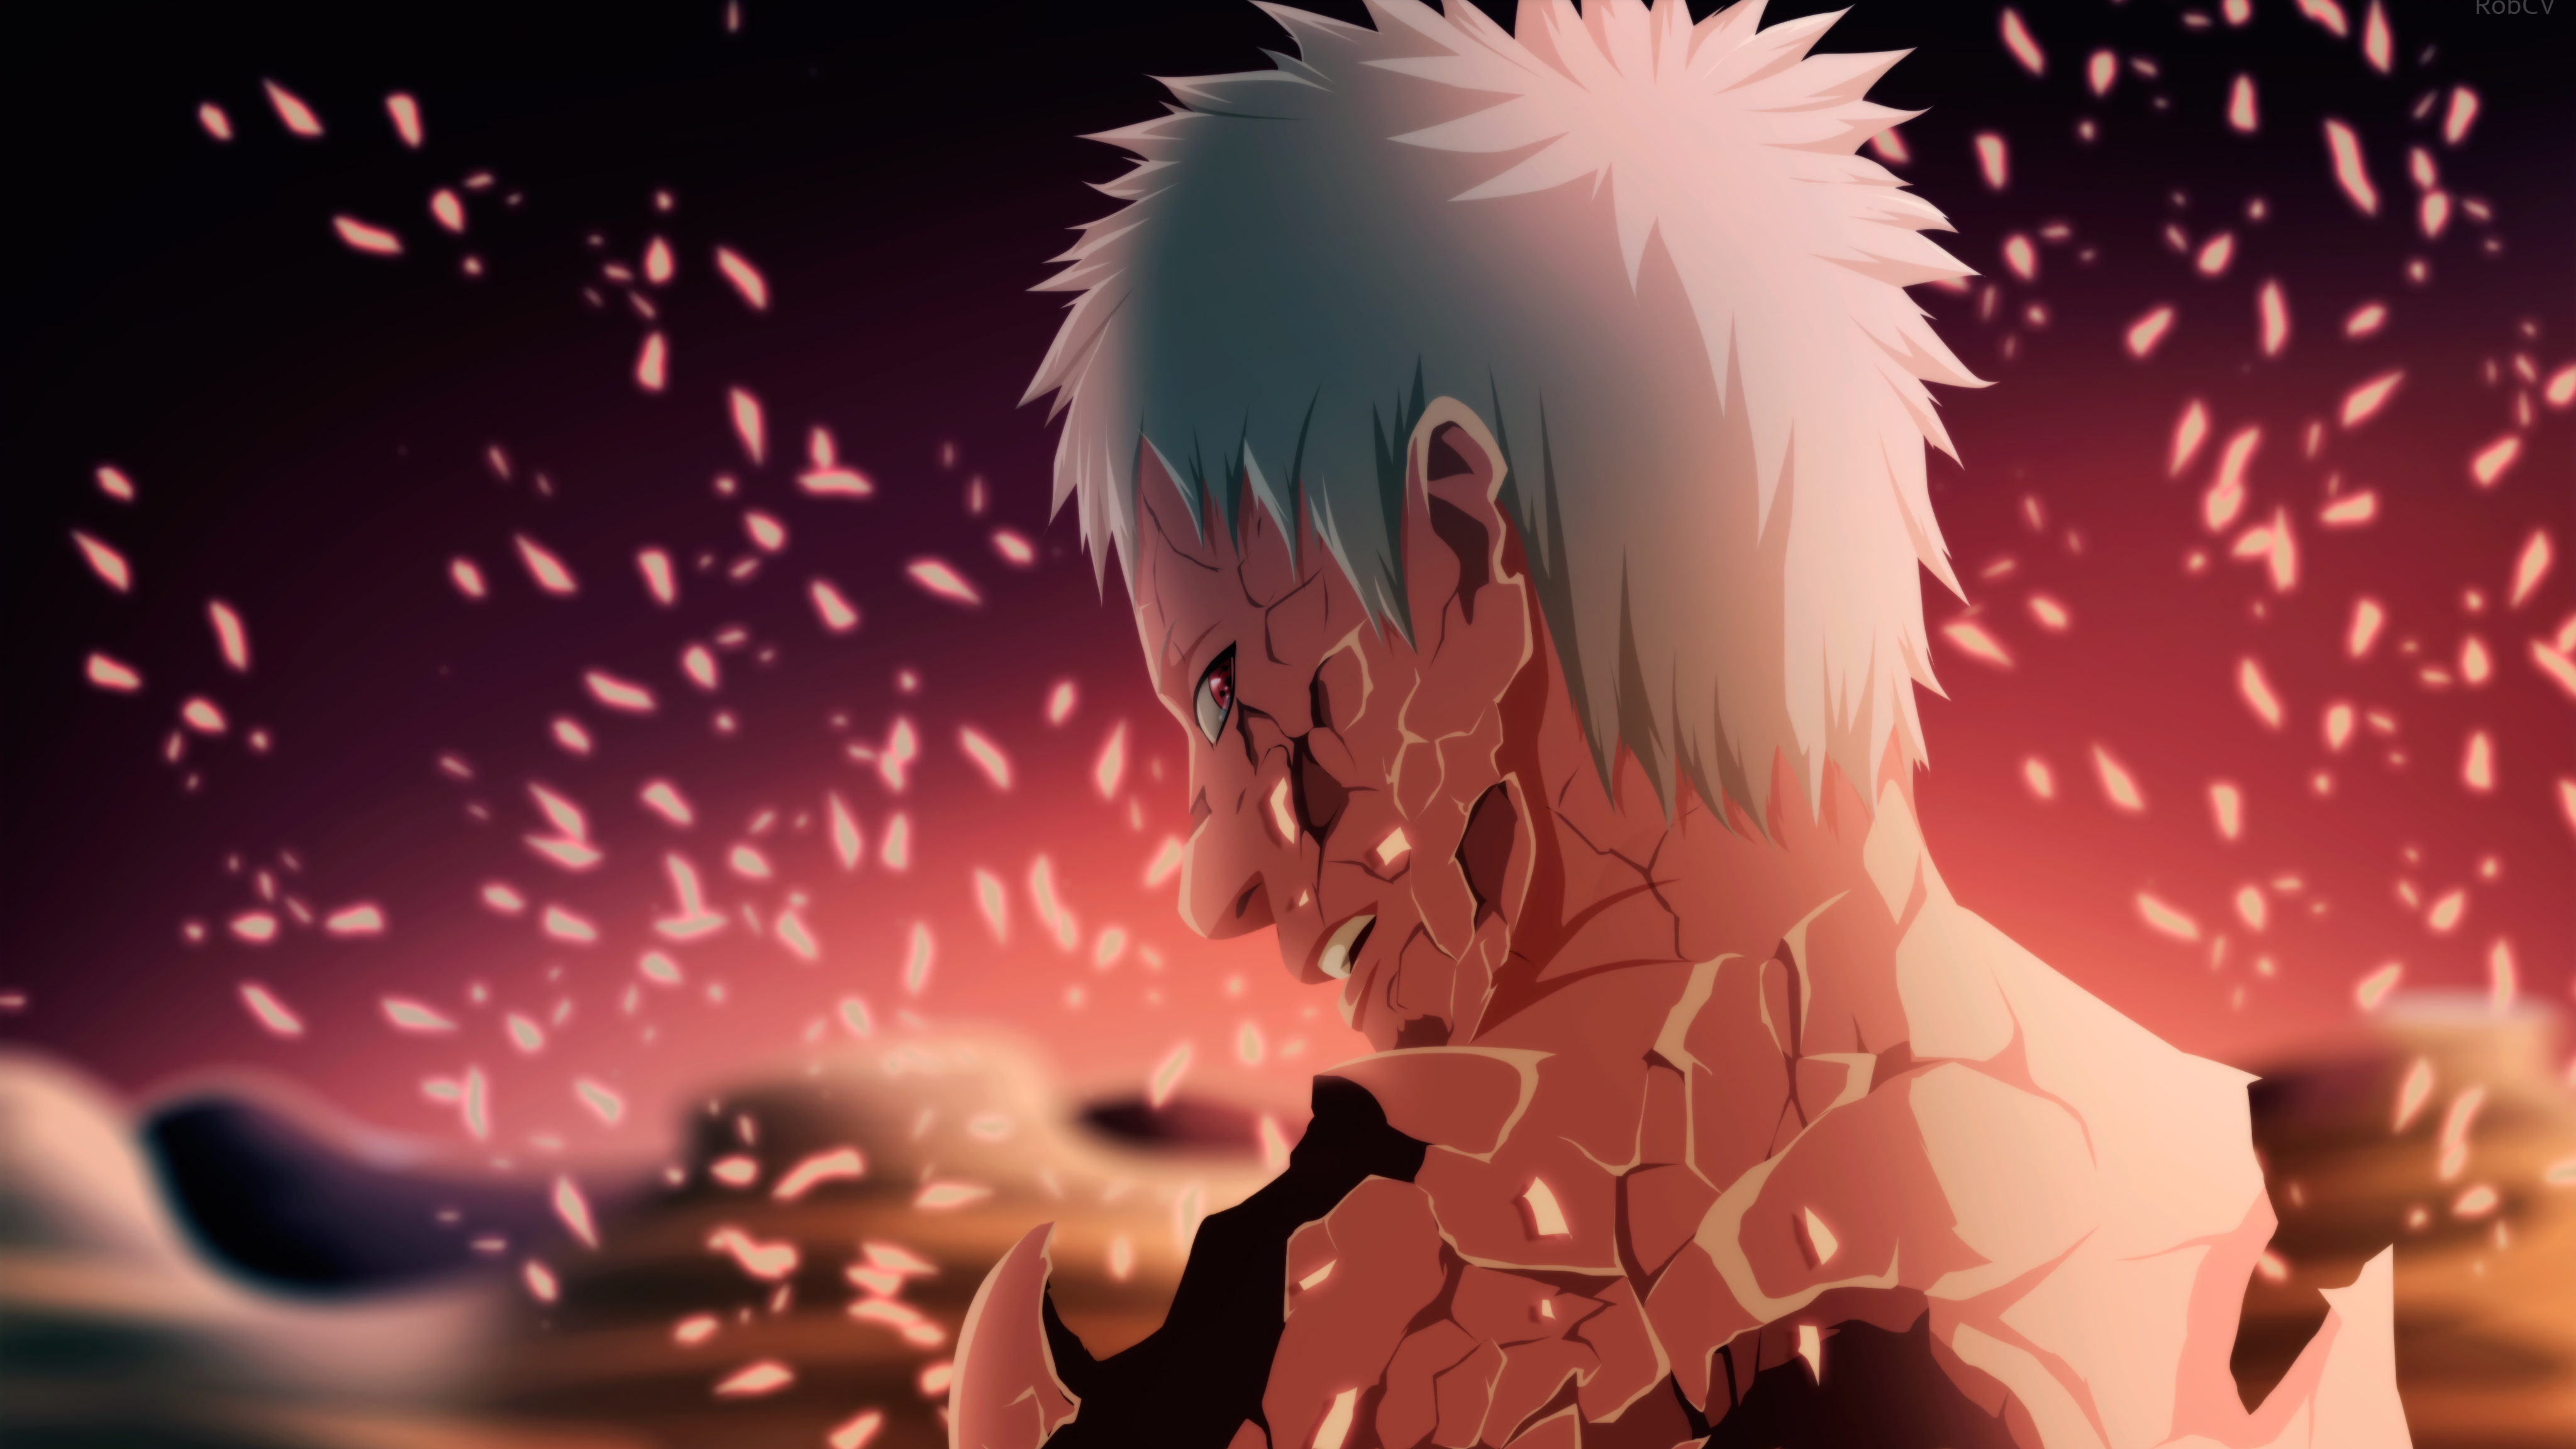 Death Of Obito Uchiha 4k Ultra Hd Wallpaper Background Image 4096x2304 Id 605597 Wallpaper Abyss This hd wallpaper is about uchiha itachi life and death, anime, original wallpaper dimensions is 1600x1200px, file size is 404.91kb. death of obito uchiha 4k ultra hd